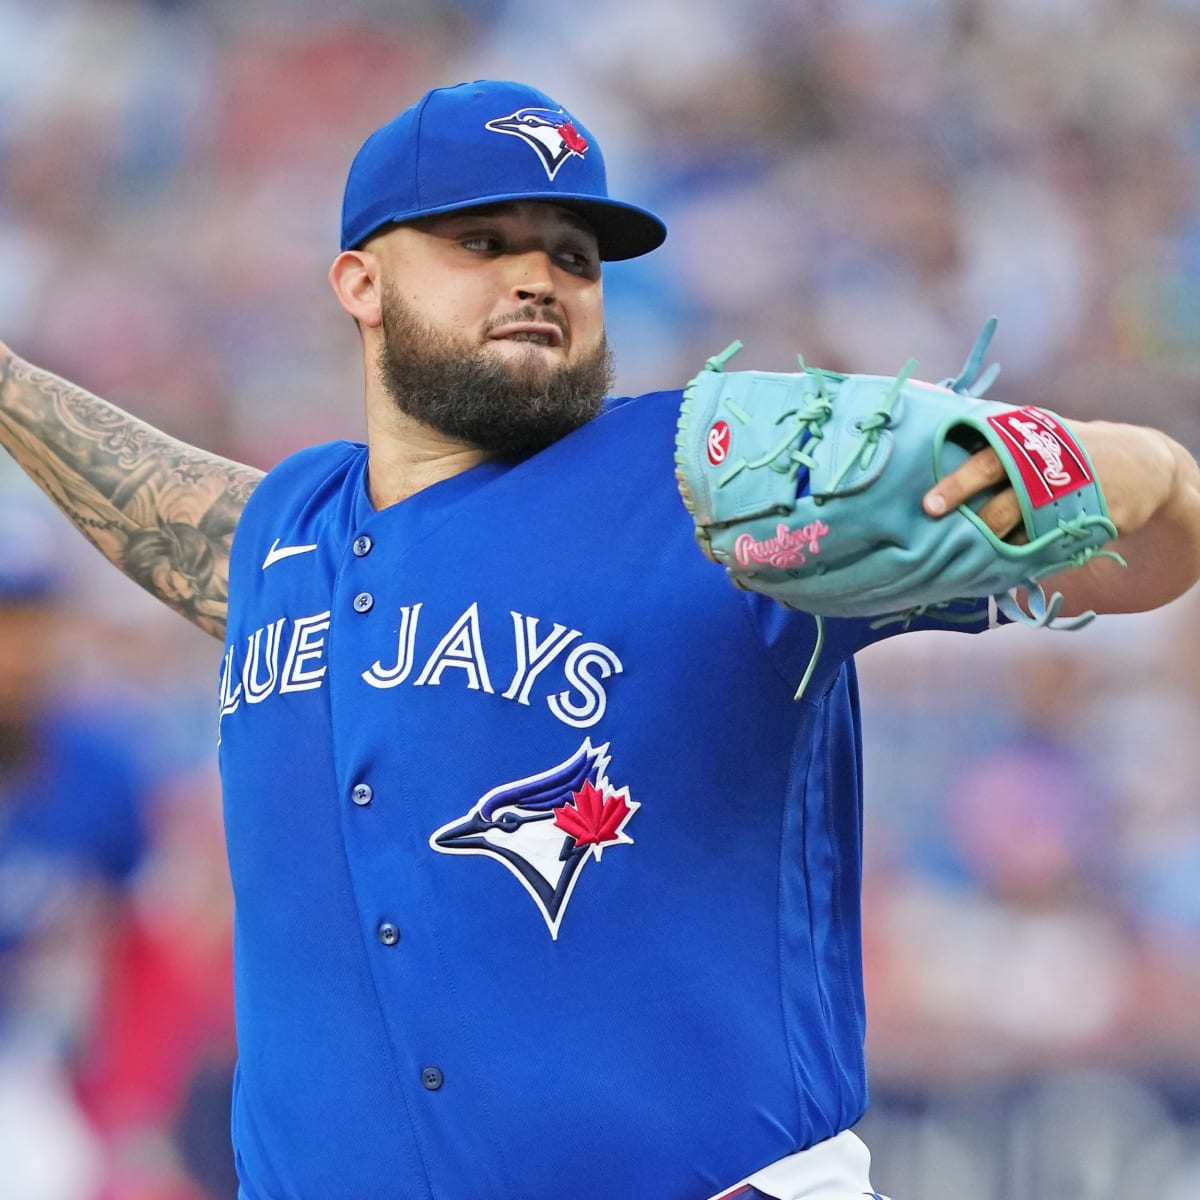 How did the Blue Jays fare at the 2022 All-Star Game? Alek Manoah